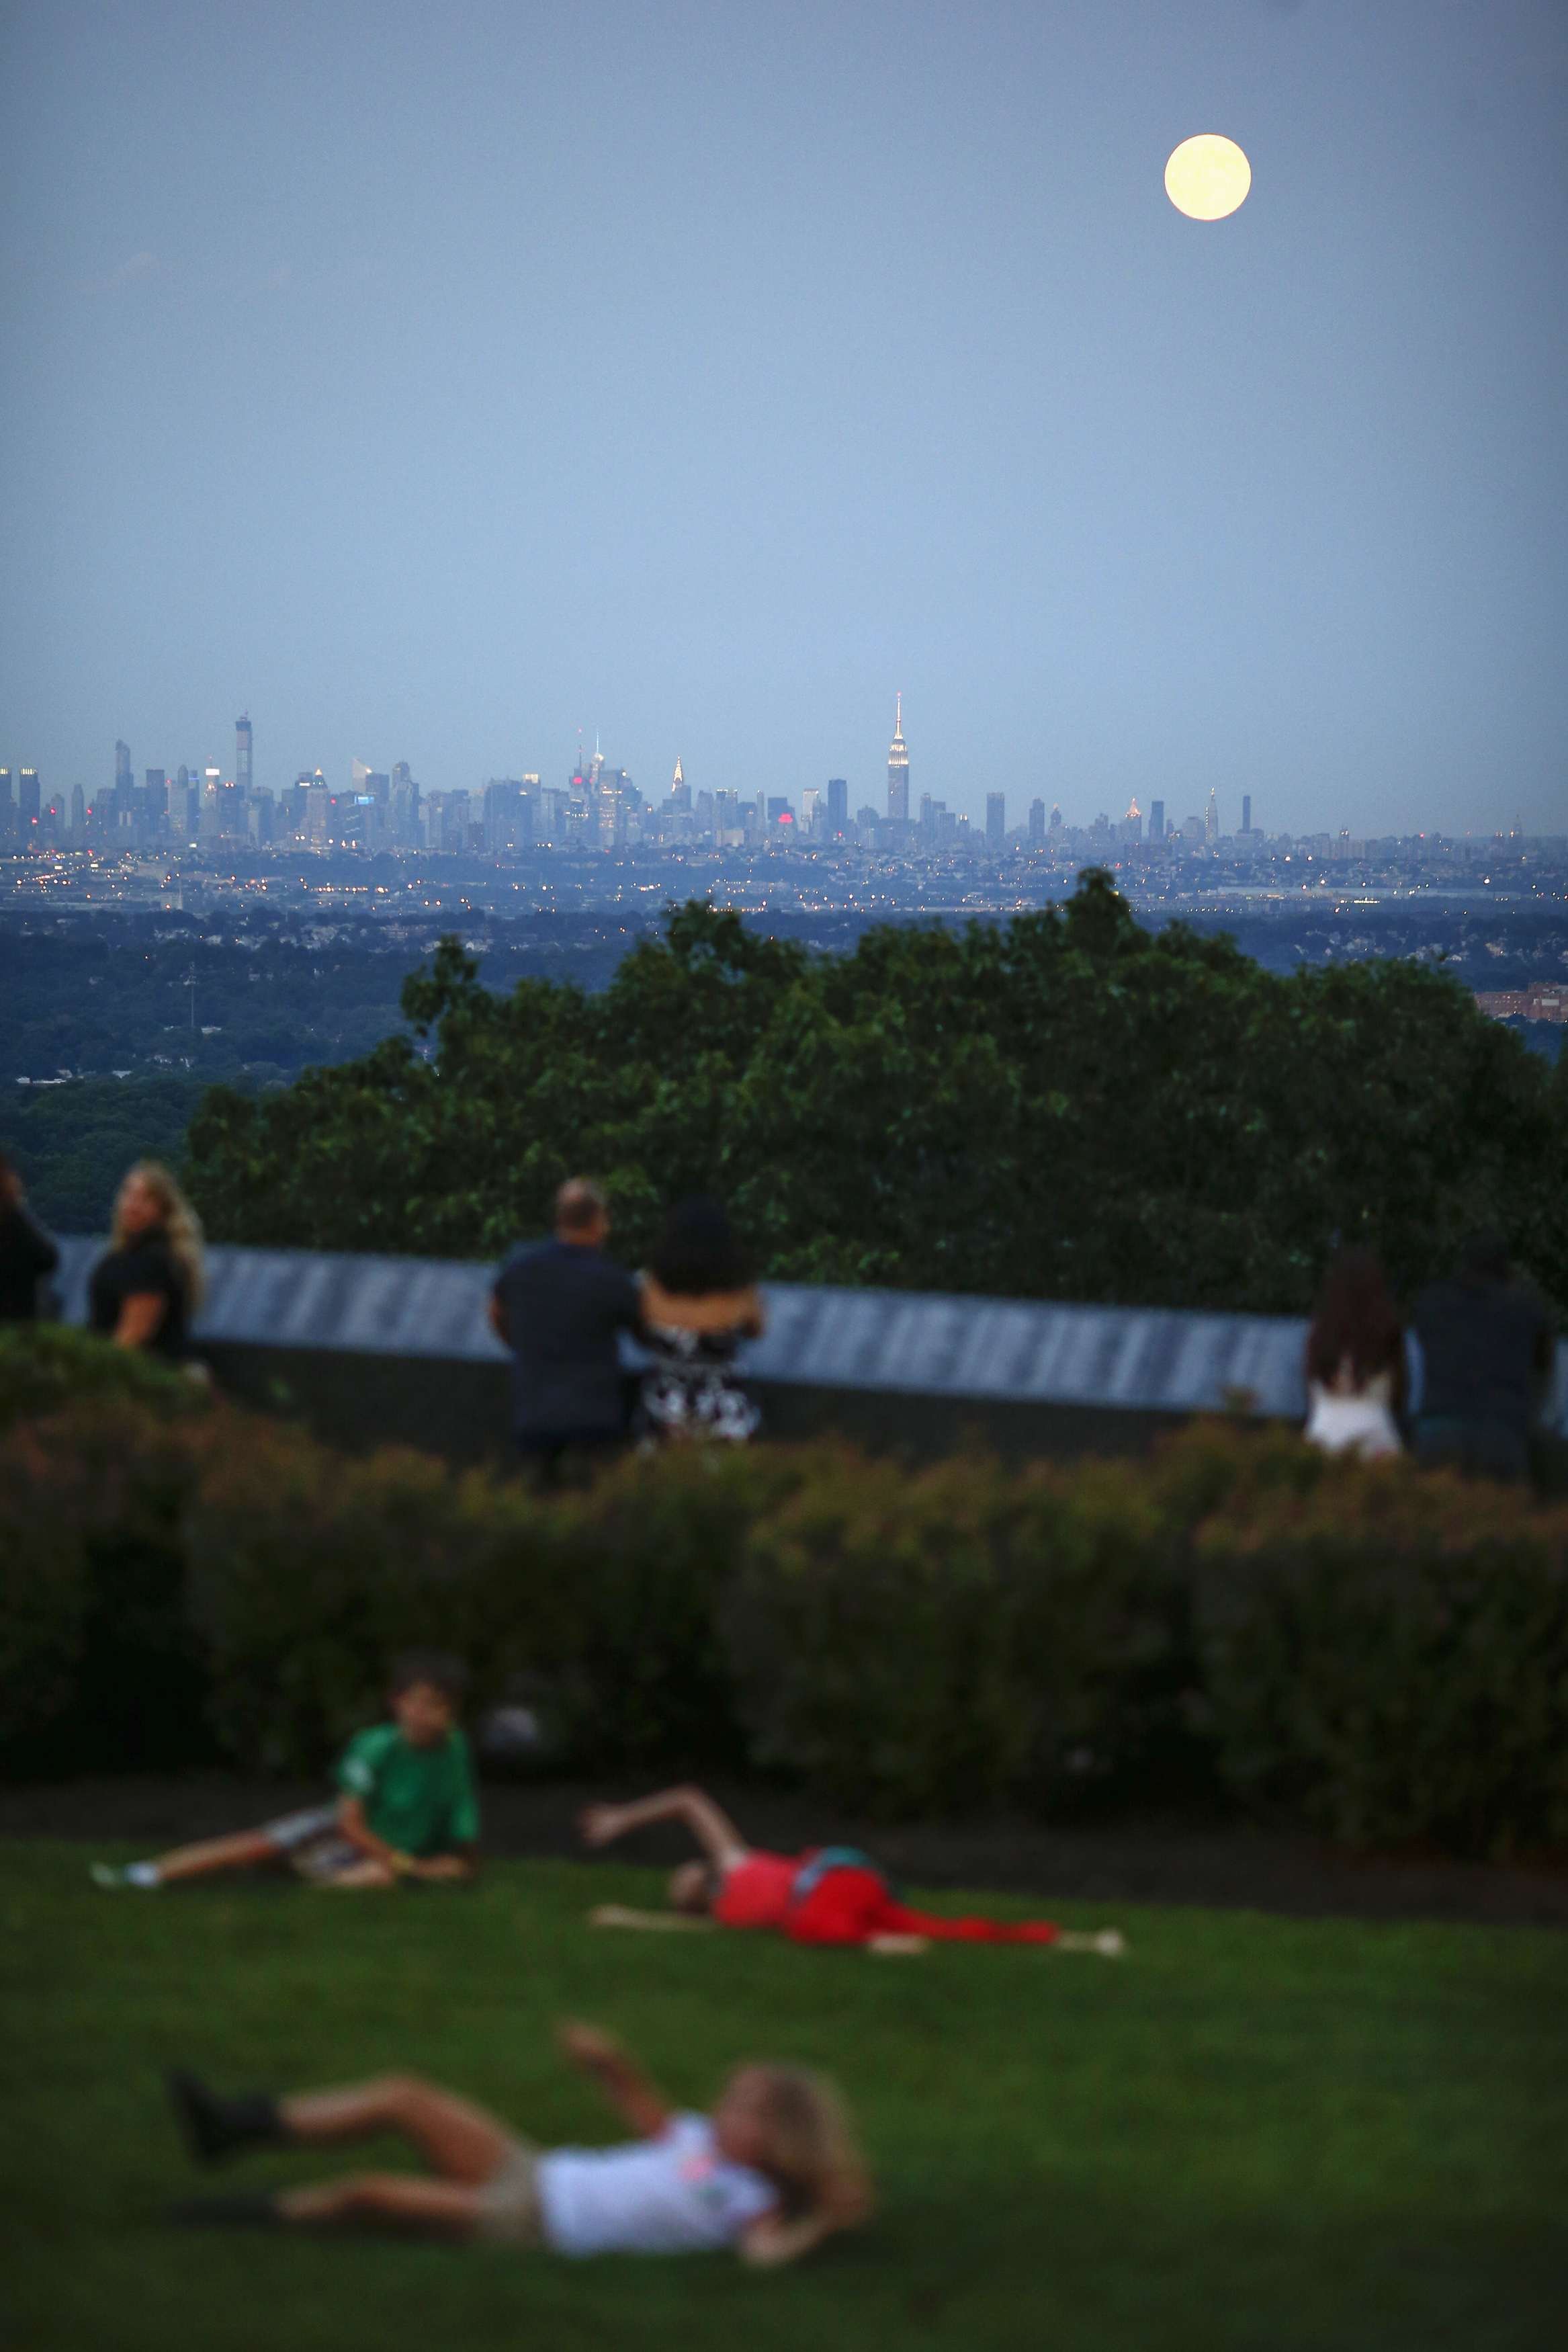 Children play on the grass while a full moon known as "supermoon" rises over the skyline of New York and the Empire State Building, as seen from the Eagle Rock Reservation in West Orange, New Jersey on August 10, 2014.